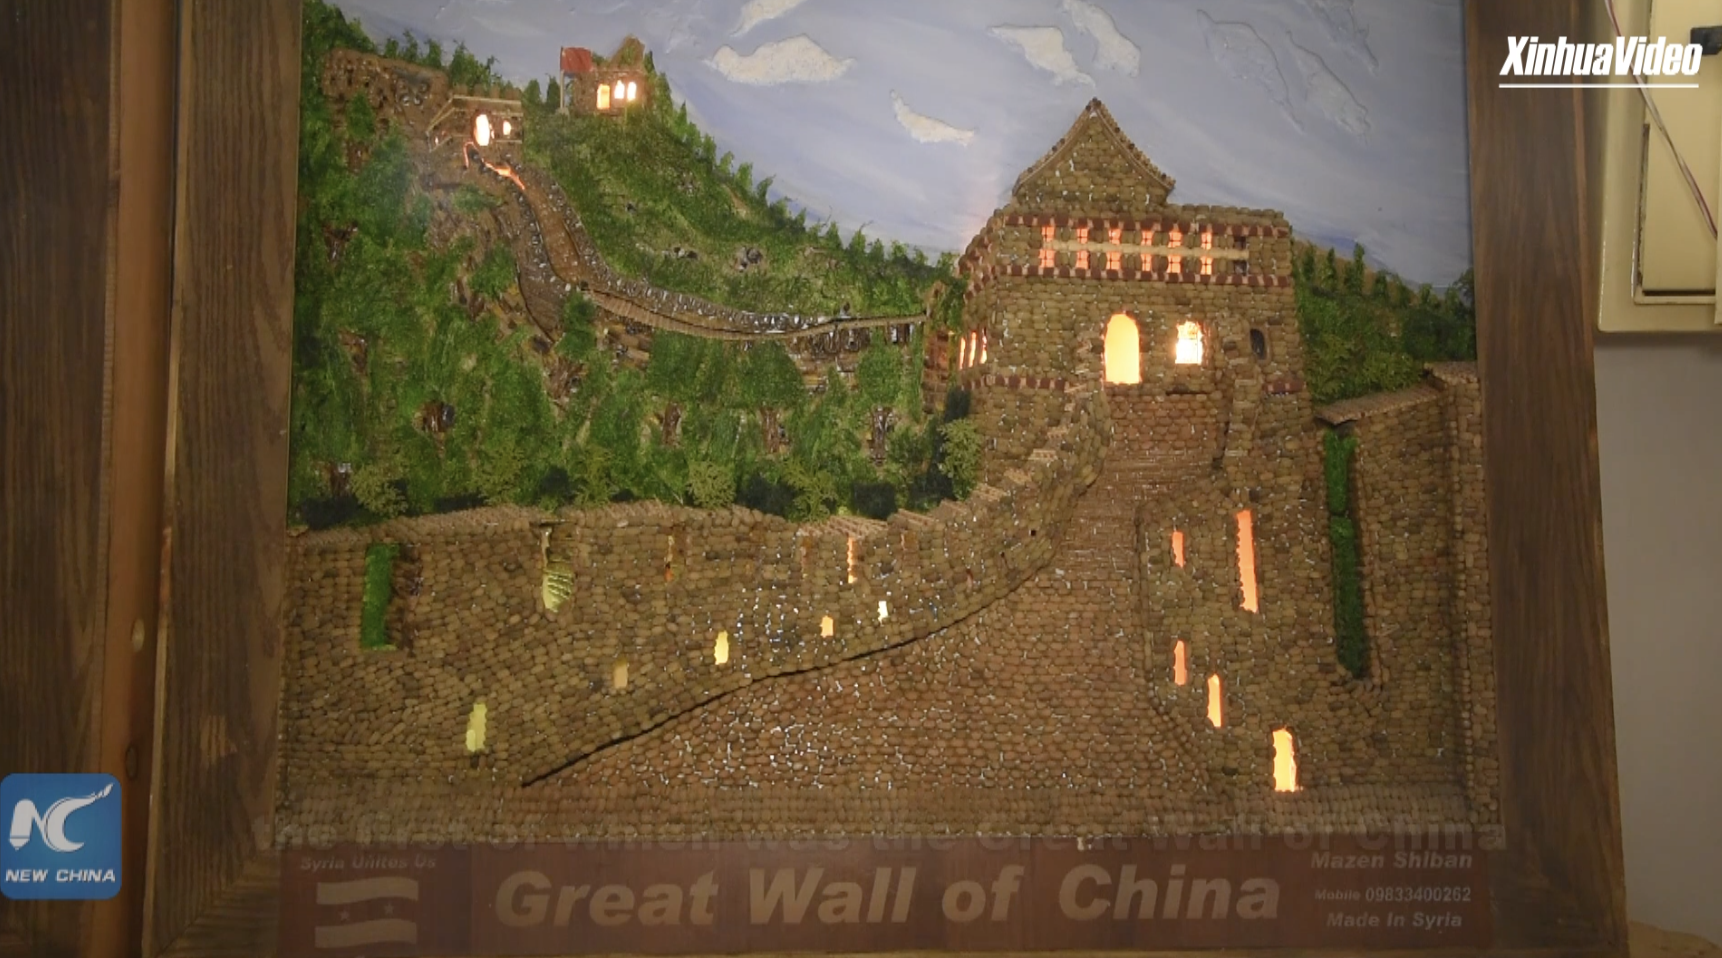 Syrian artist aspires to internationalism by creating China's Great Wall from olive kernels